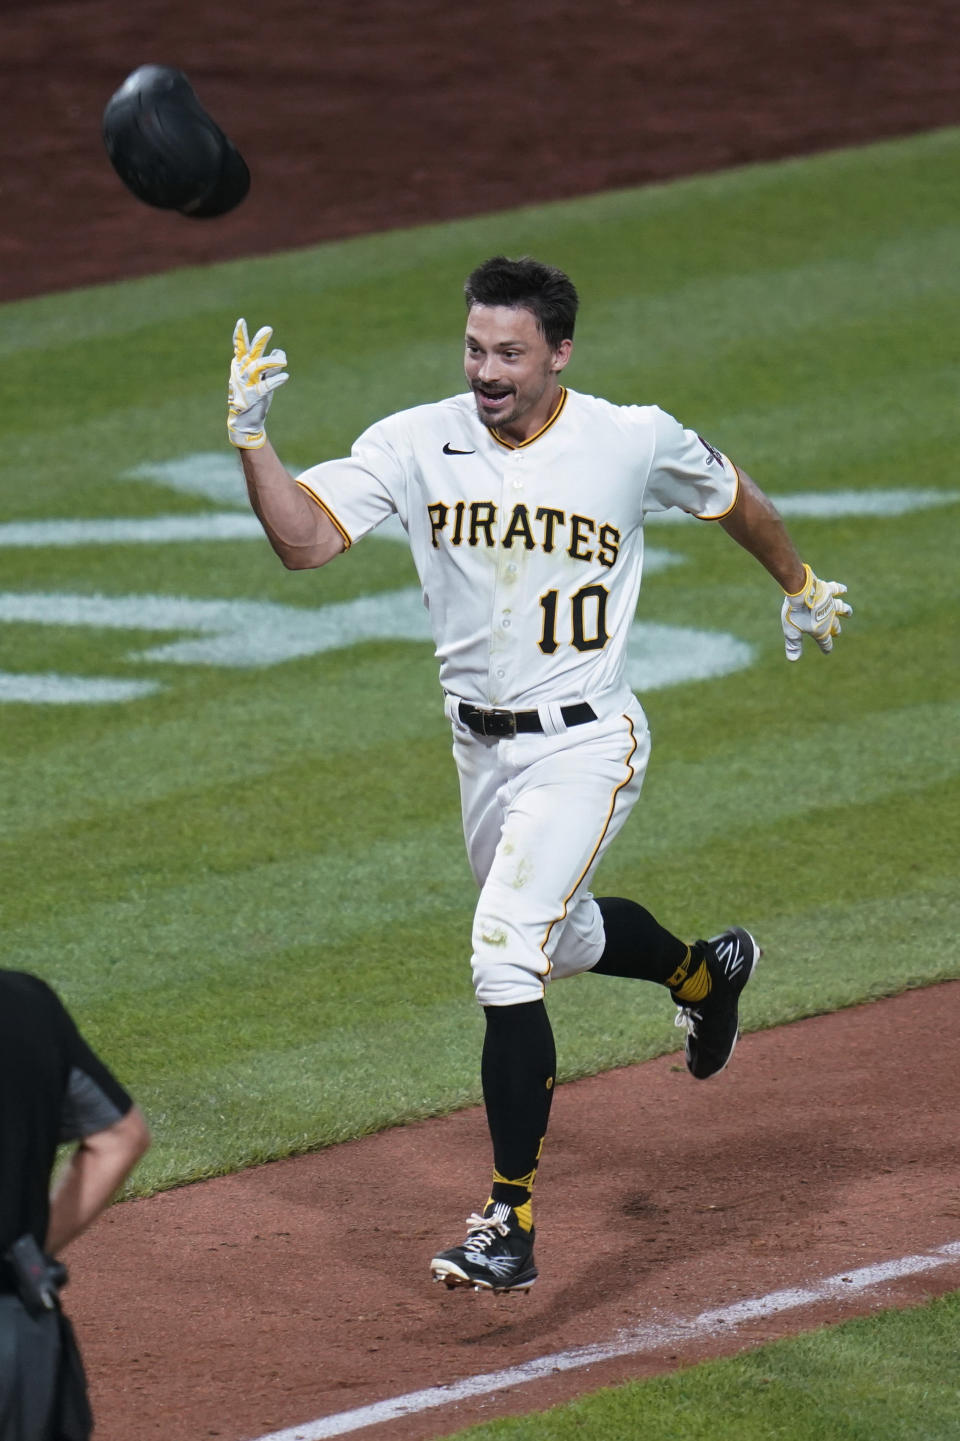 Pittsburgh Pirates' Bryan Reynolds celebrates hitting a game-ending home run against the Milwaukee Brewers in the ninth inning of a baseball game against the Milwaukee Brewers, Wednesday, Aug. 3, 2022, in Pittsburgh. The Pirates won 8-7. (AP Photo/Keith Srakocic)